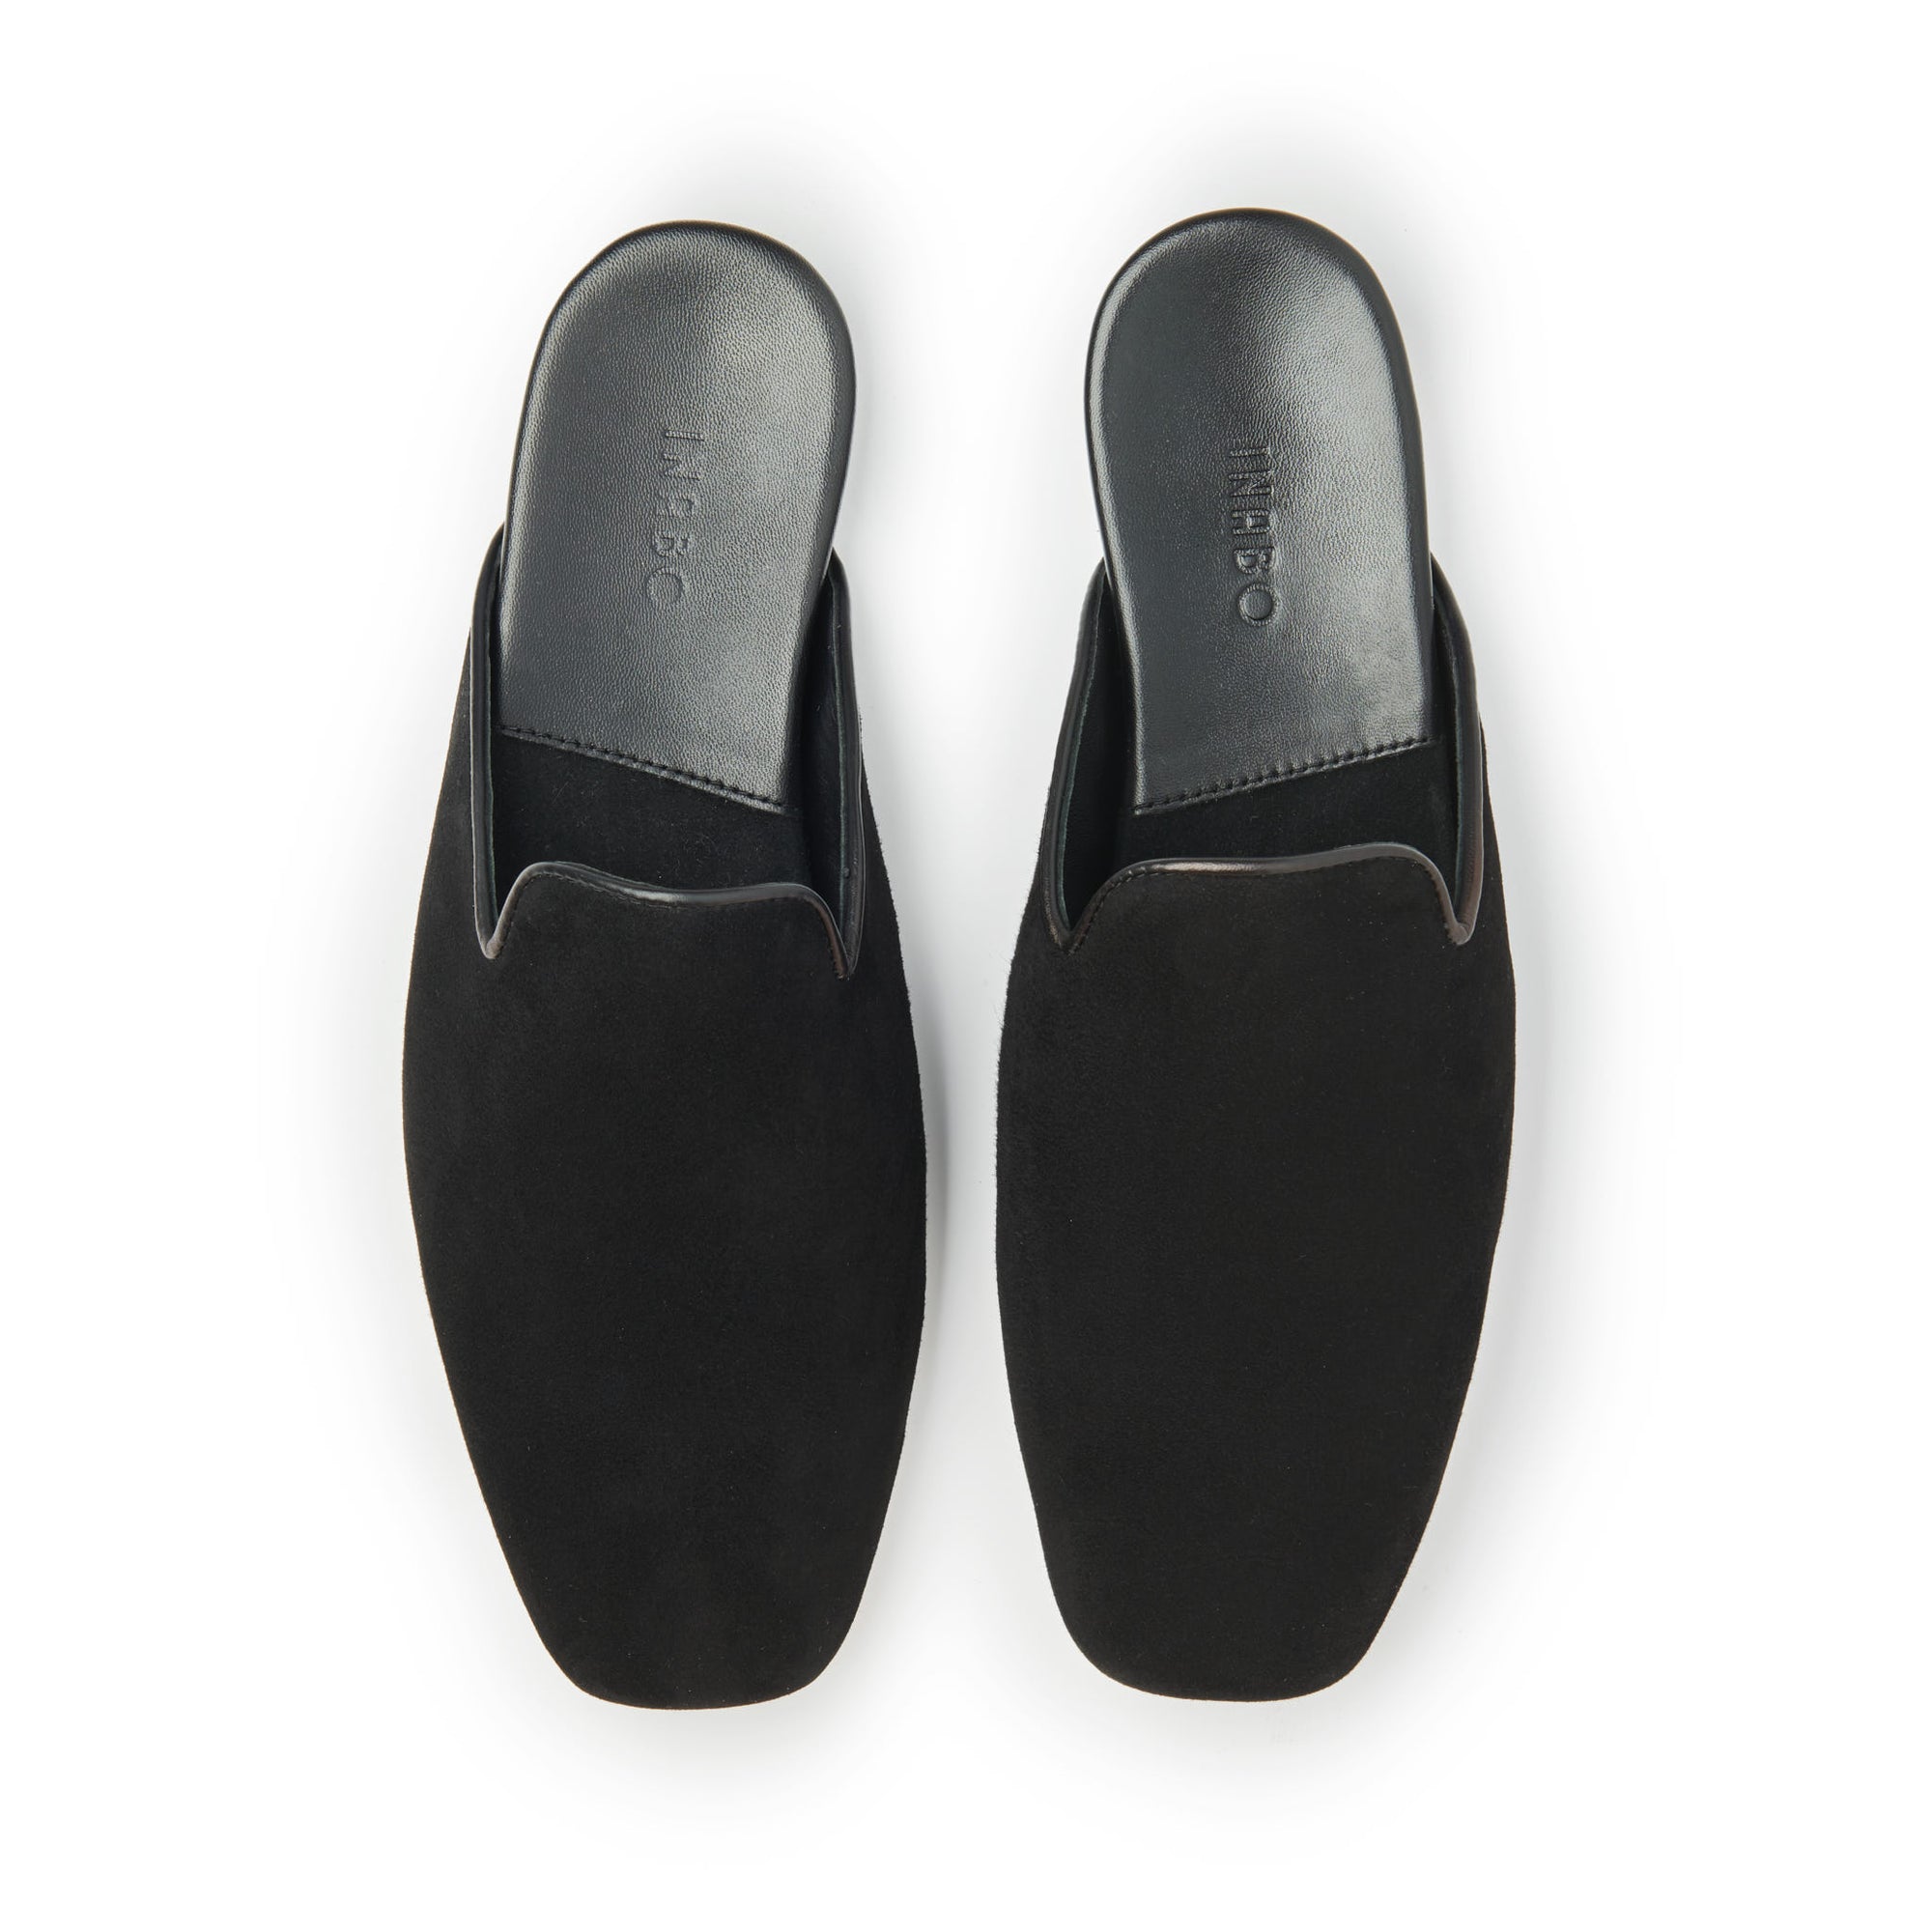 Inabo Women's Hilma slipper in black suede and leather insole shown from above